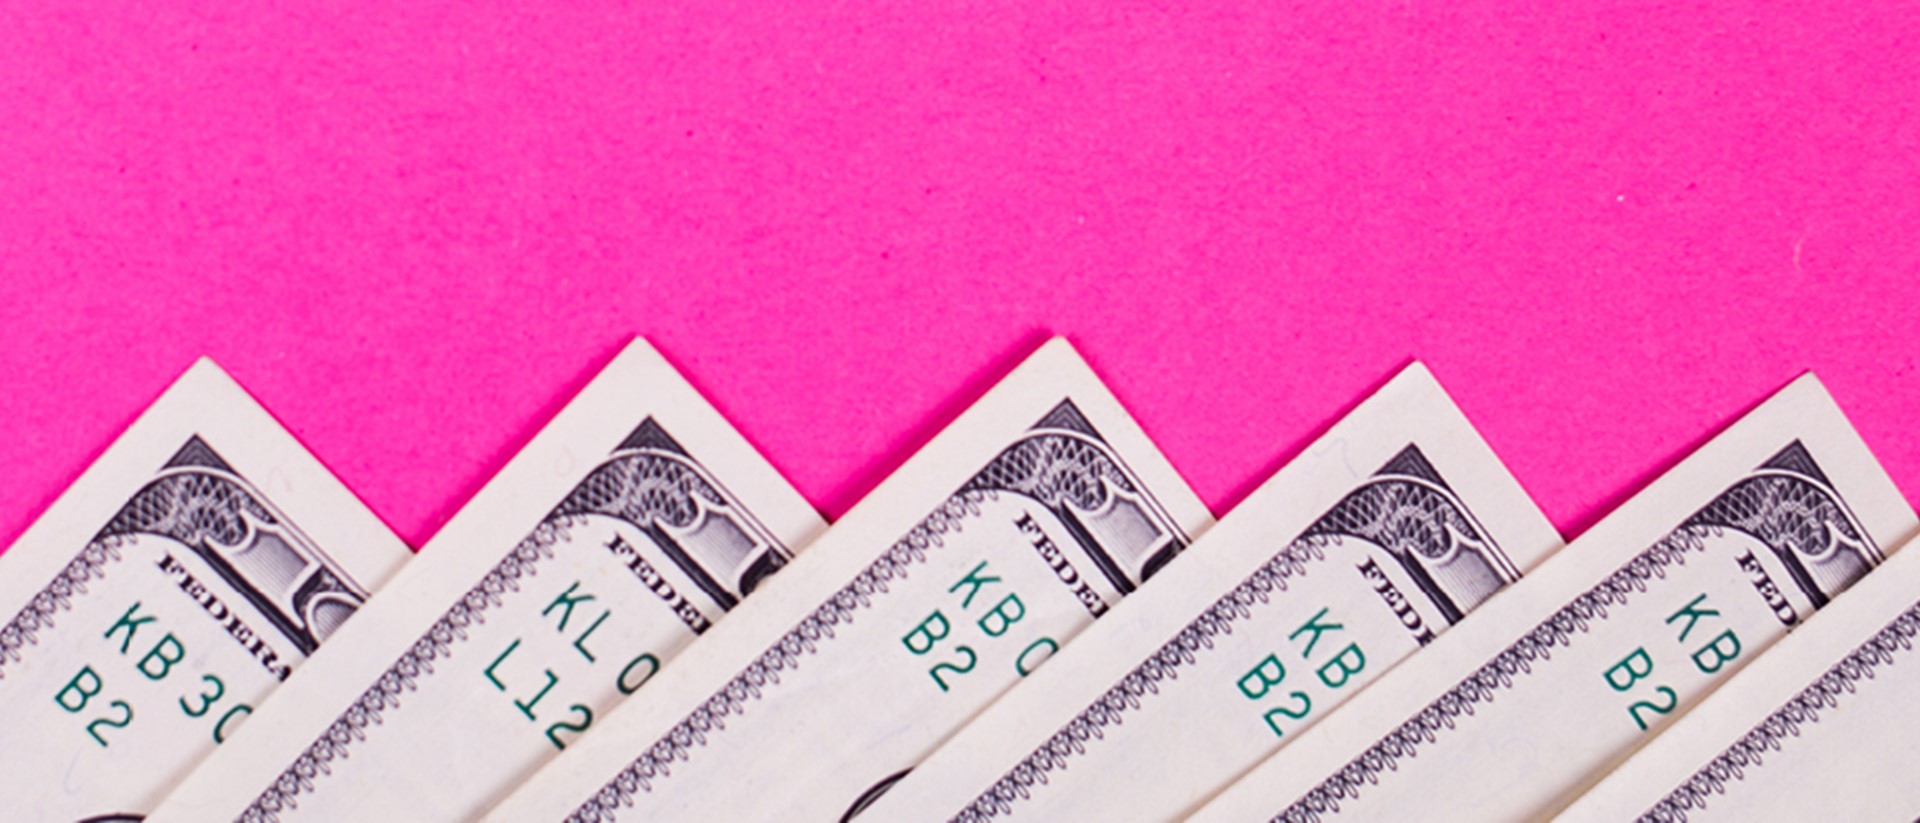 Image of money notes spread out on a pink background